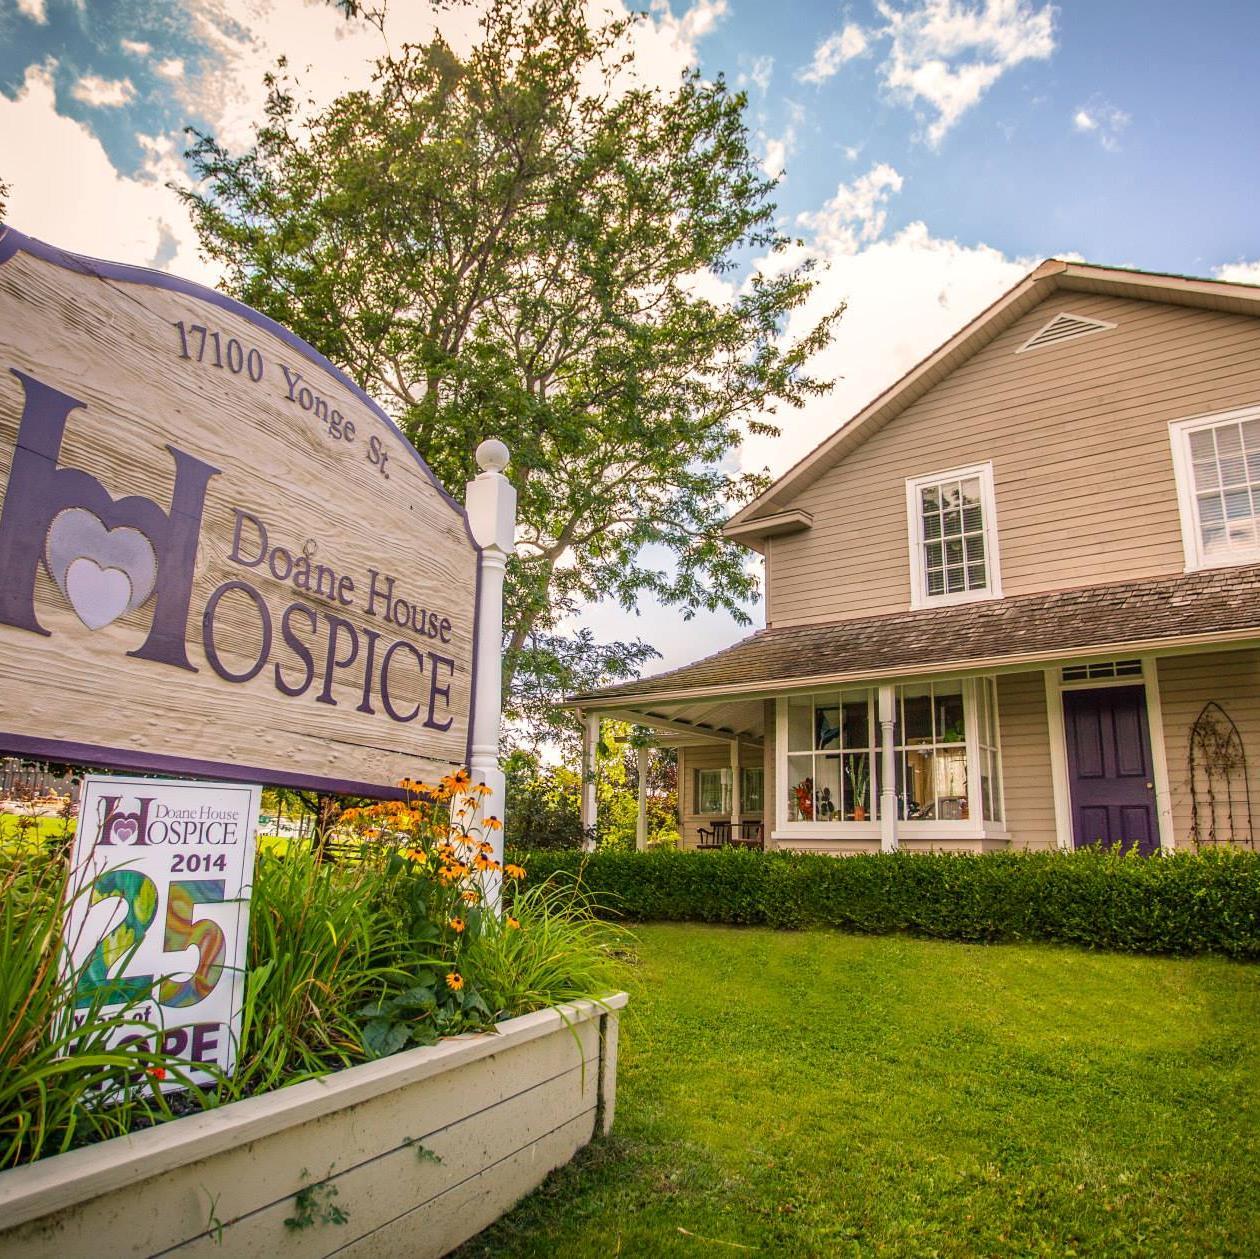 Doane House Hospice provides non-medical support for those affected by or caring for an individual with a life-threatening illness.